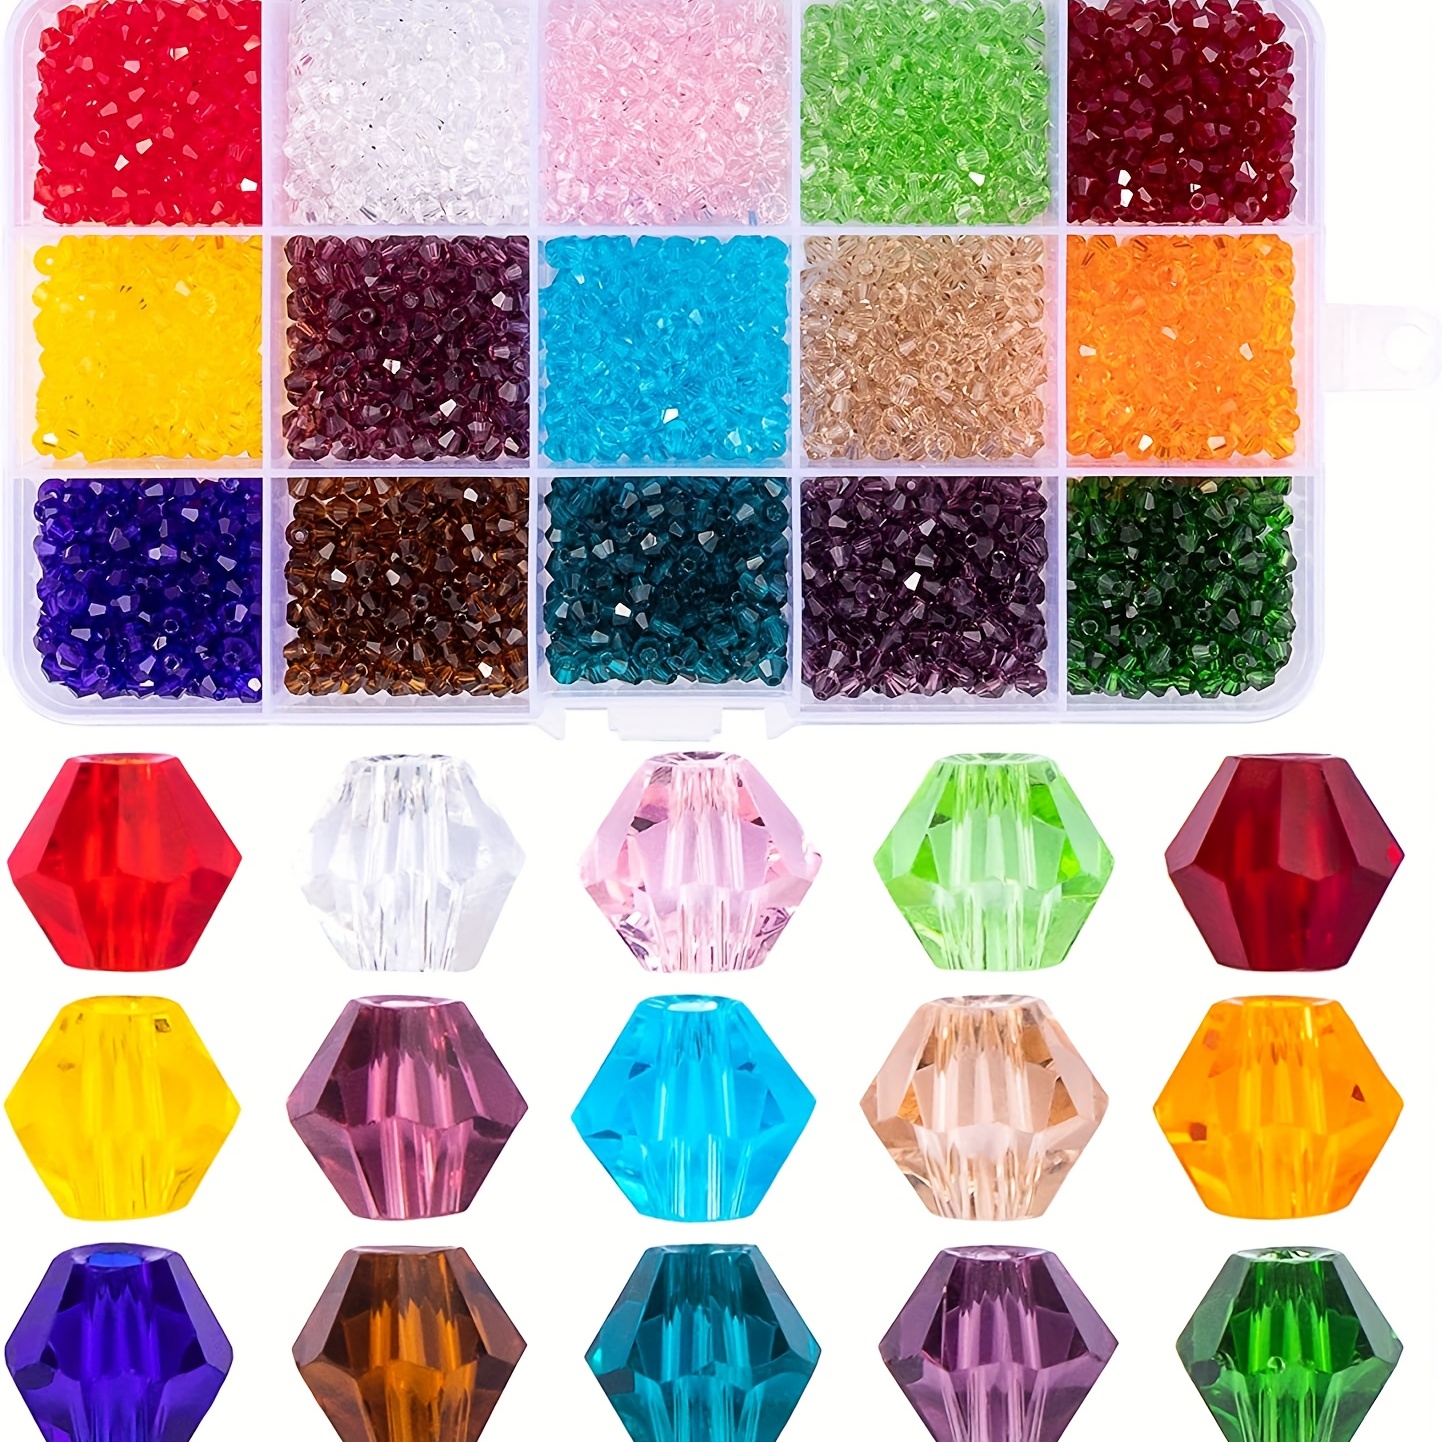  6MM Glass Beads 1400Pcs for Jewelry Making 28 Colors Round  Gemstone Crystal Beads Bracelet Making Kit Loose Beads with 2 Rolls Crystal  Elastic Thread for Crafts DIY Necklace Earrings Light Color 